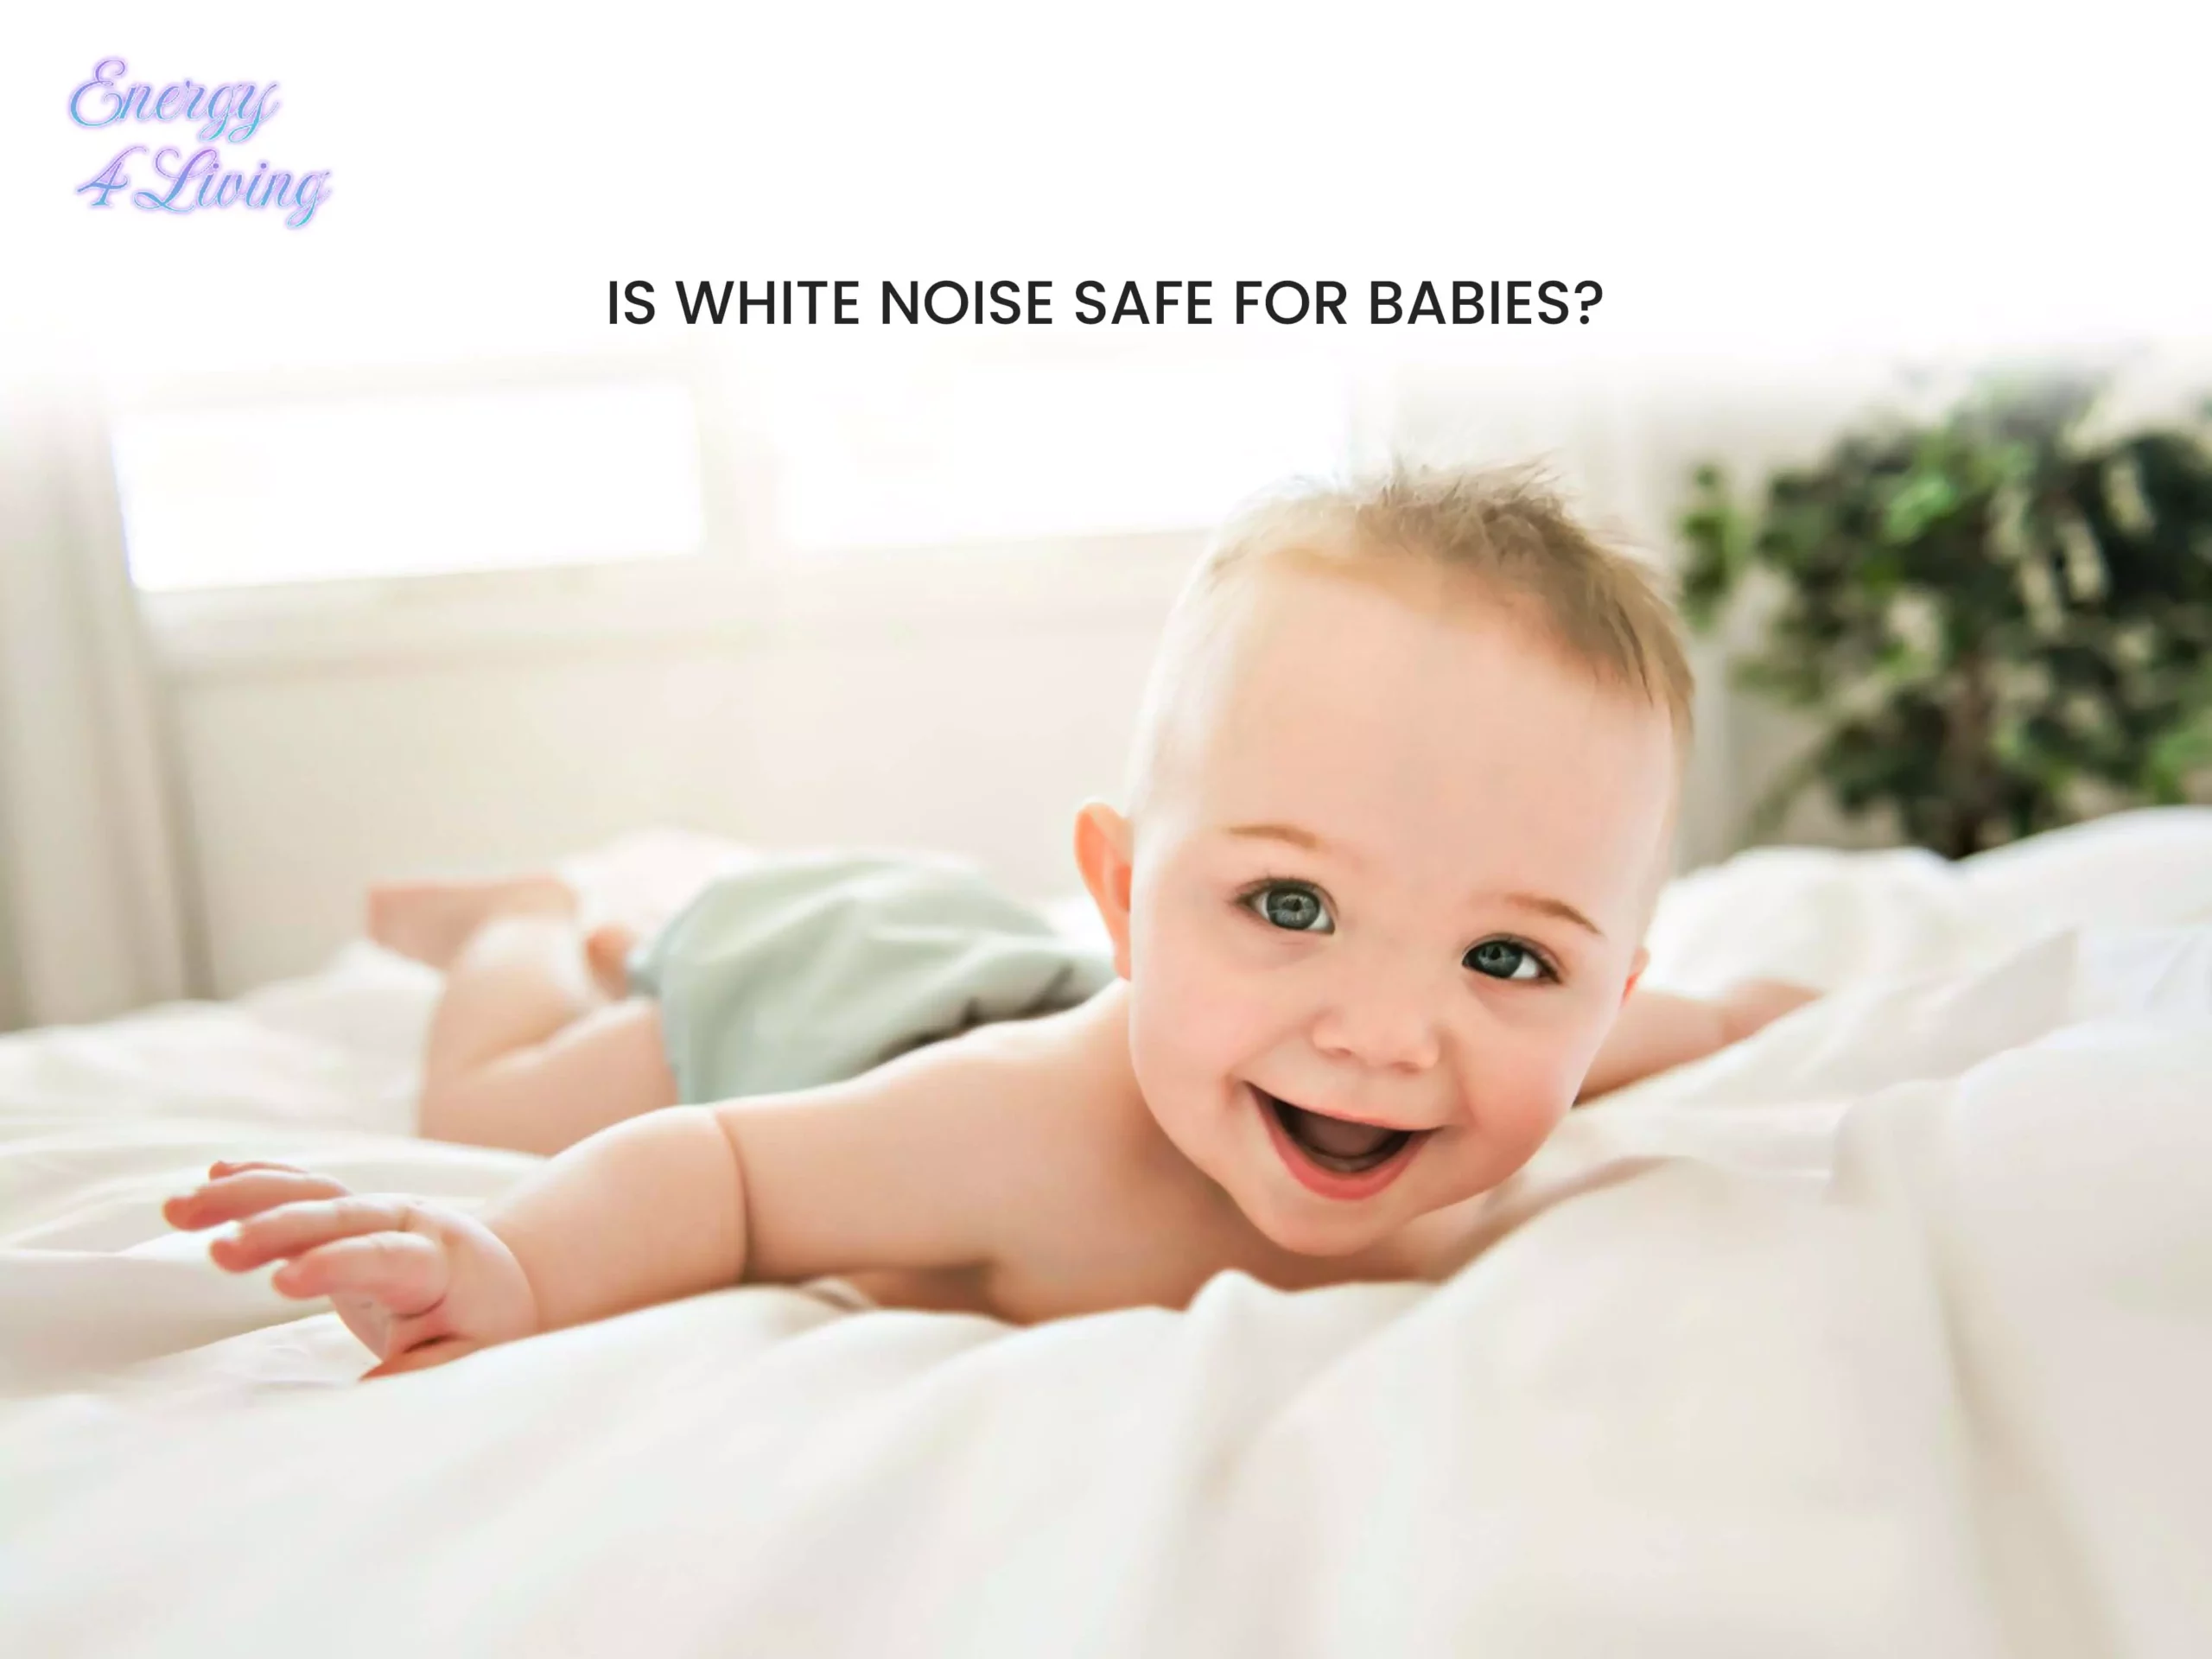 Is white noise safe for babies?